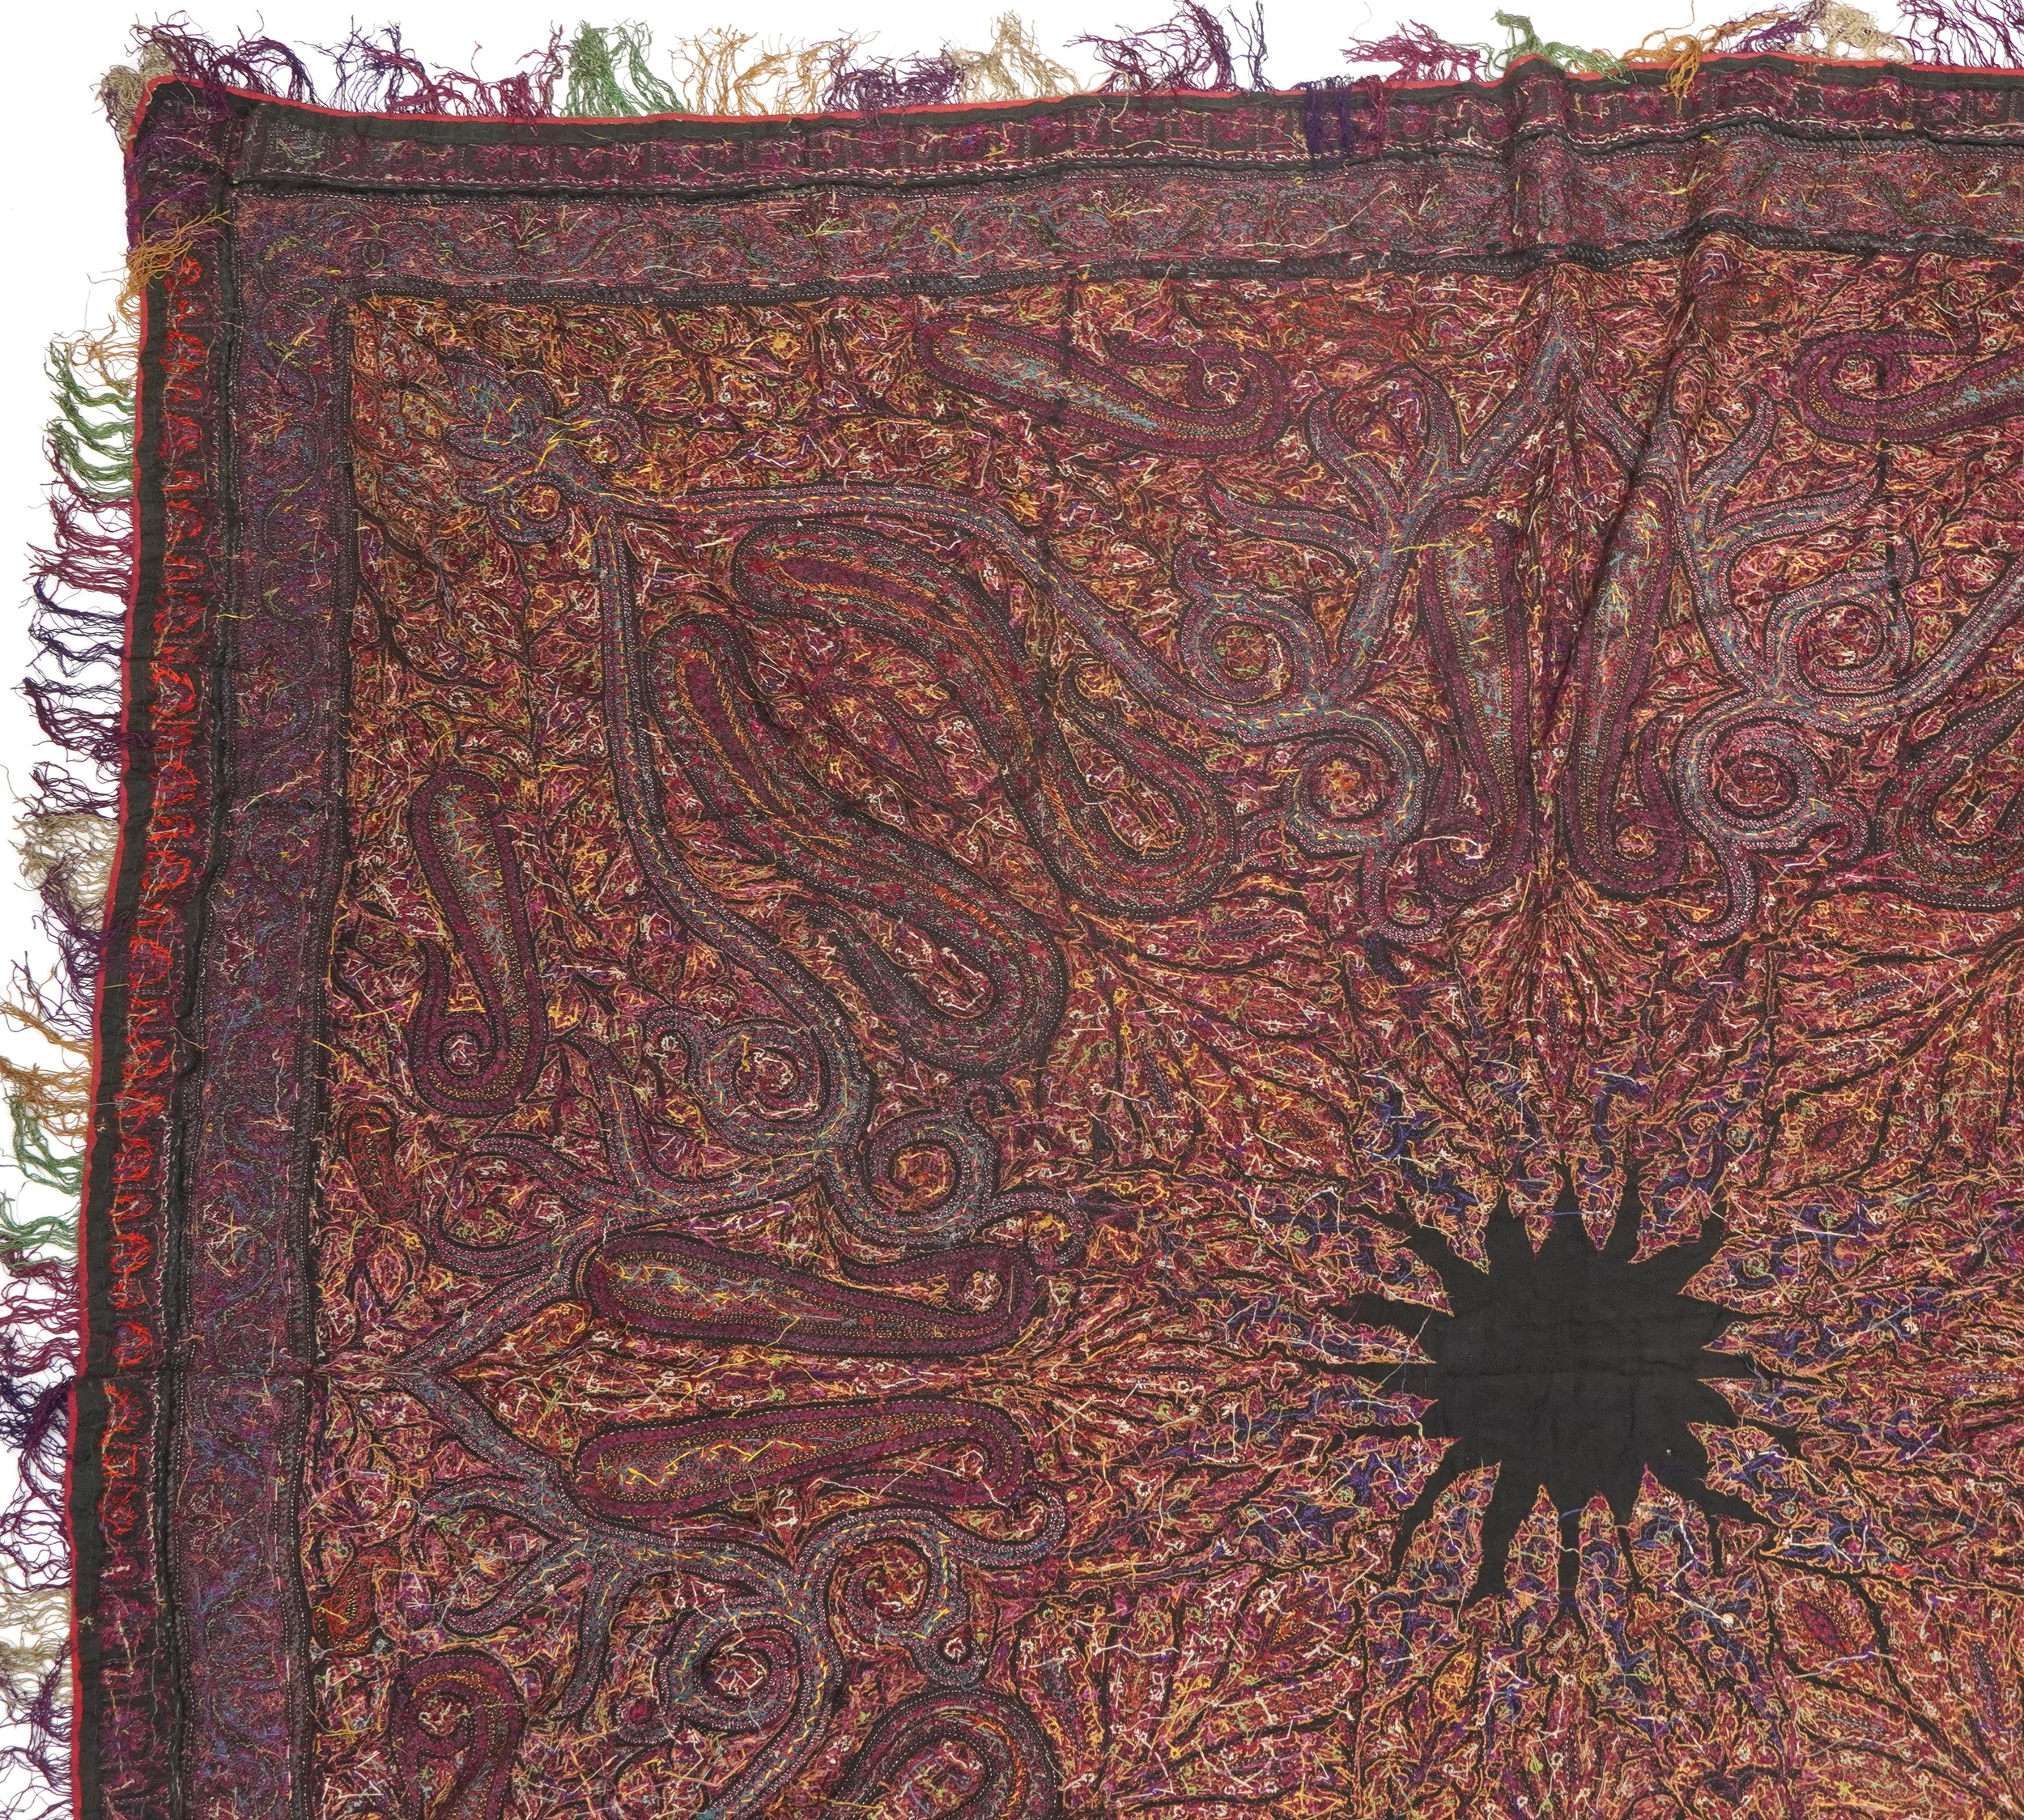 19th century Indian Kashmir/cashmere textile or shawl, 170cm x 170cm : For further information on - Image 9 of 12